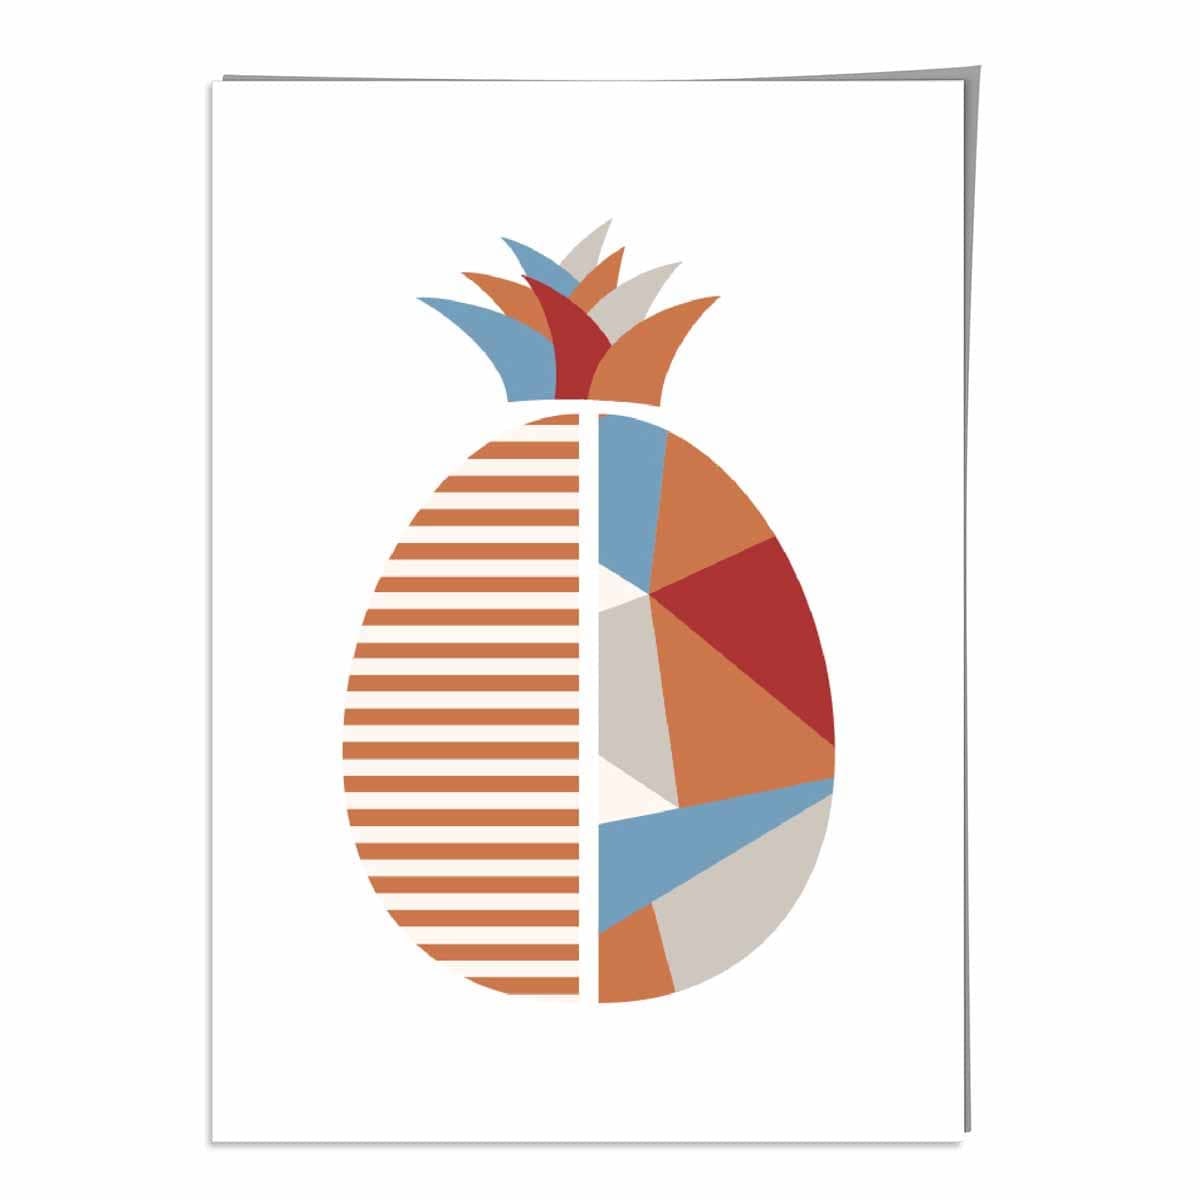 Geometric Fruit Poster of a Pineapple in Red Orange Blue